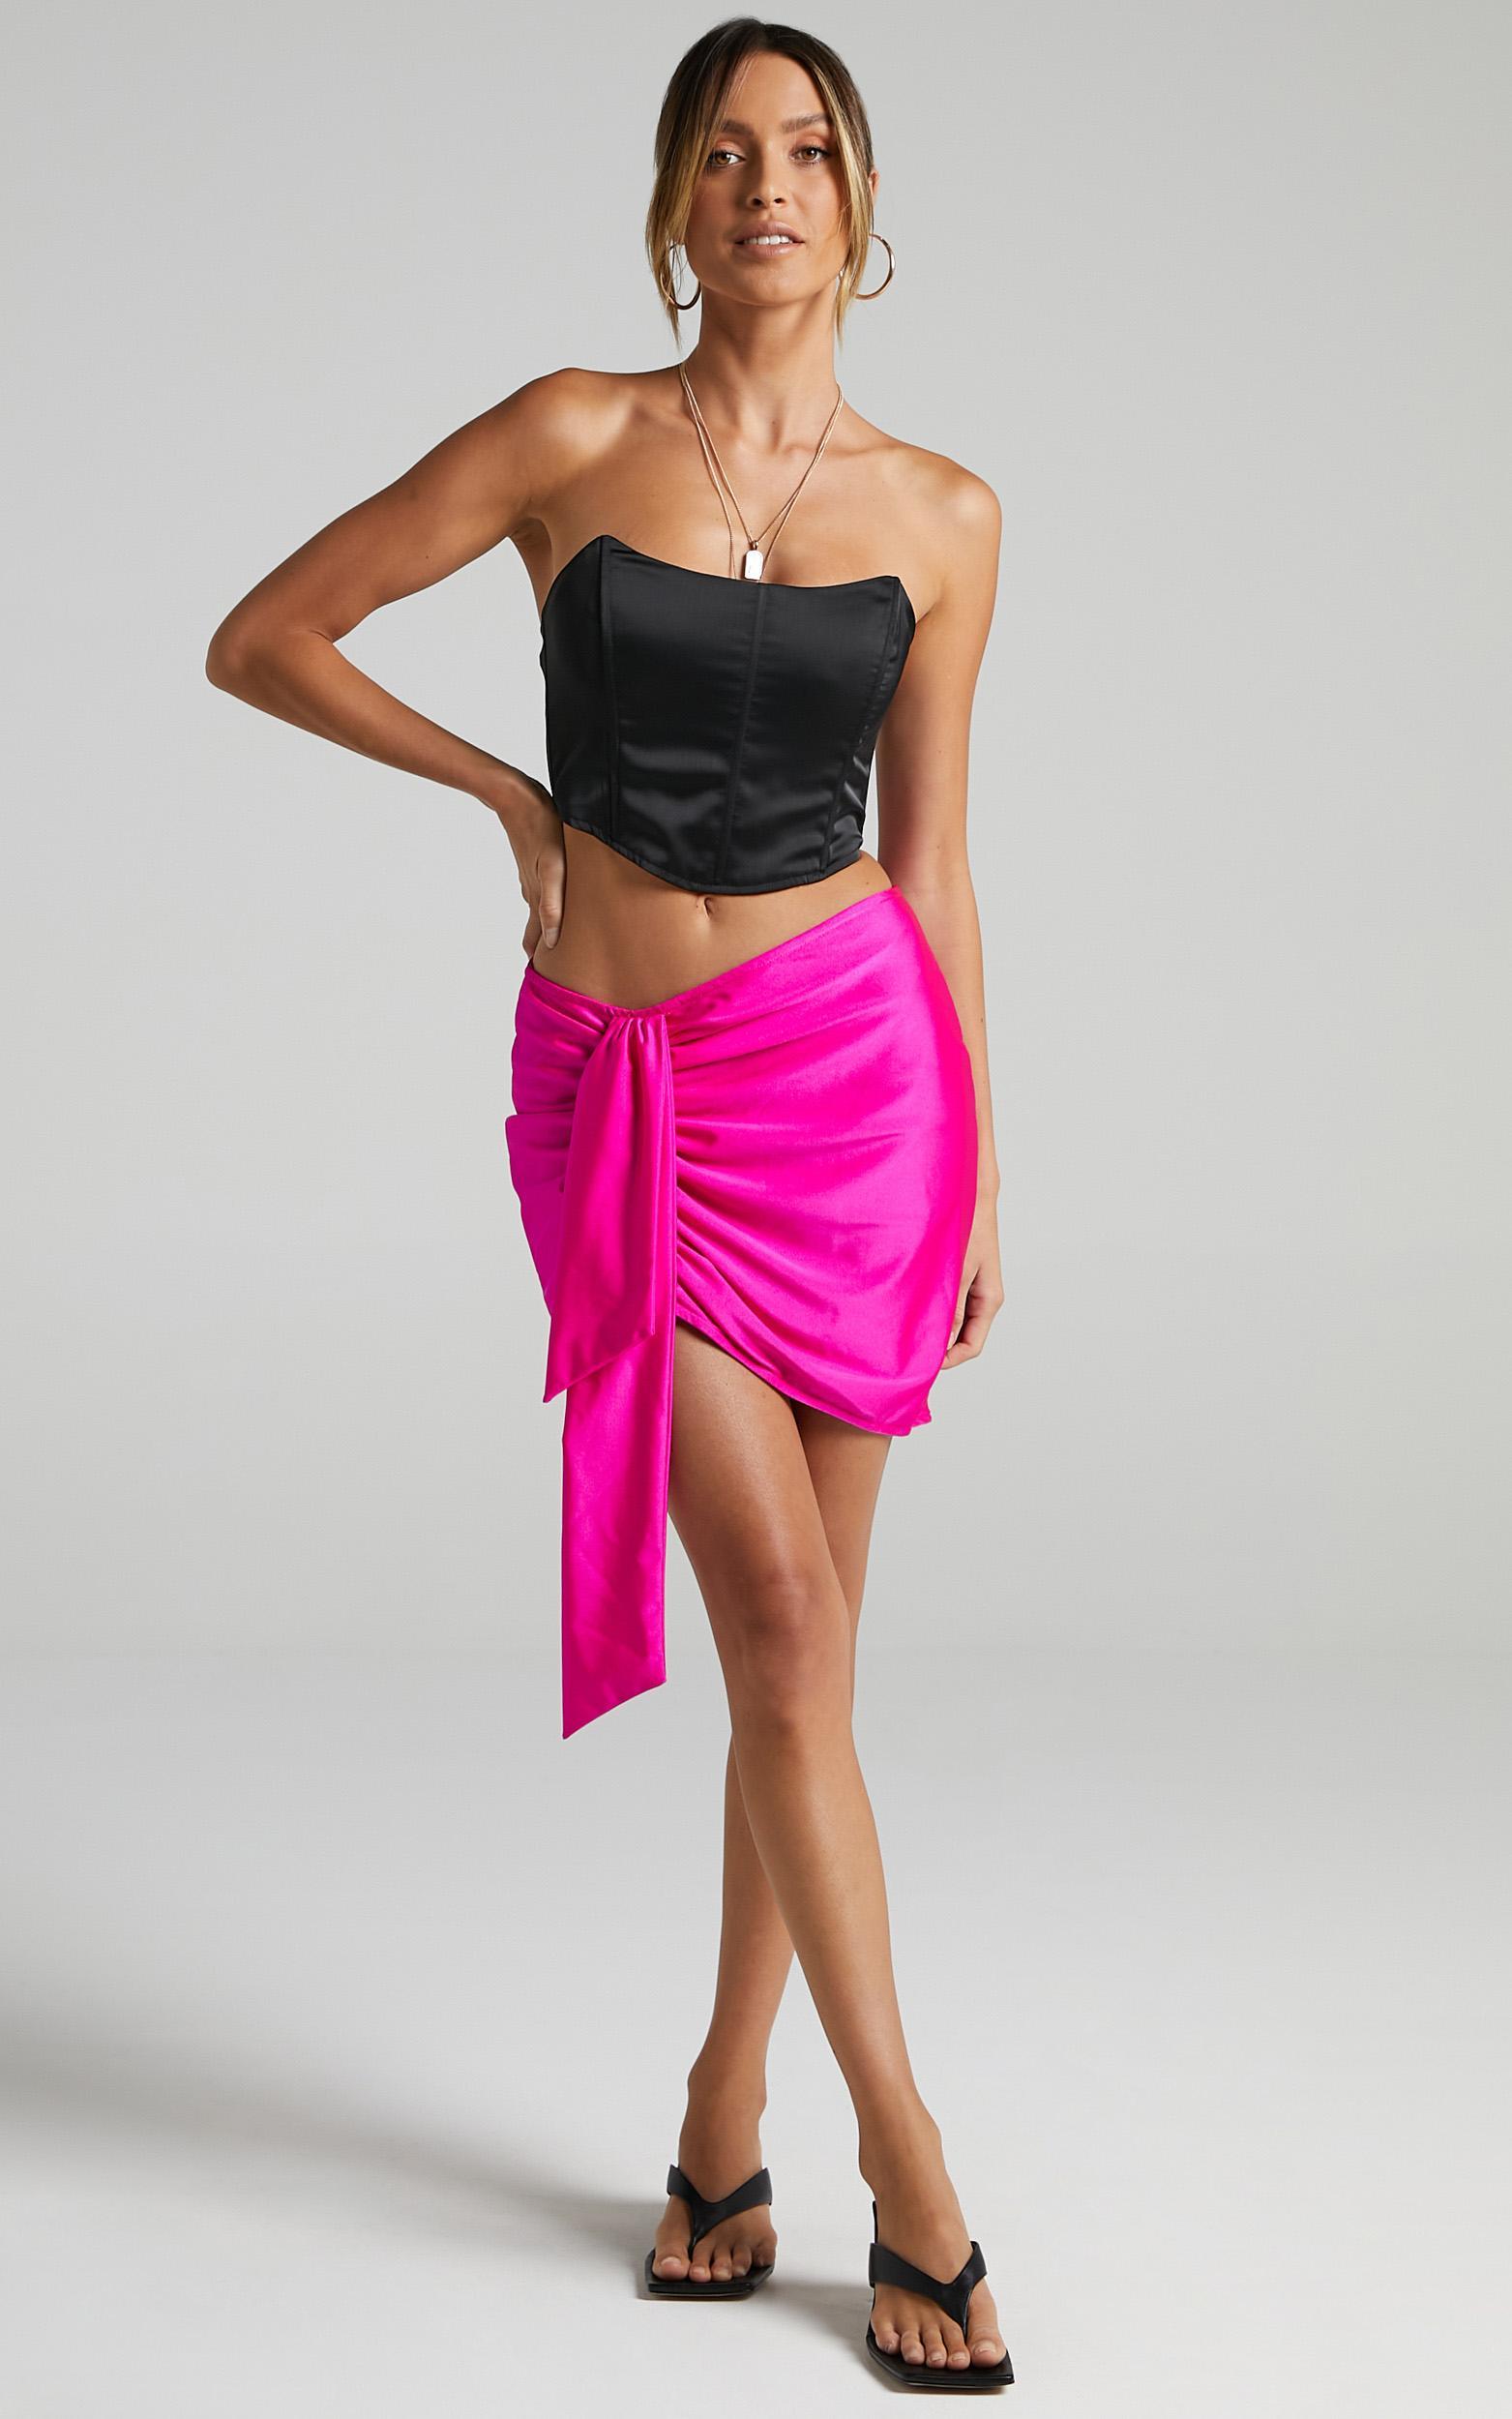 Lioness - Diamonds In The Sky Skirt in Pink - 06, PNK2, hi-res image number null